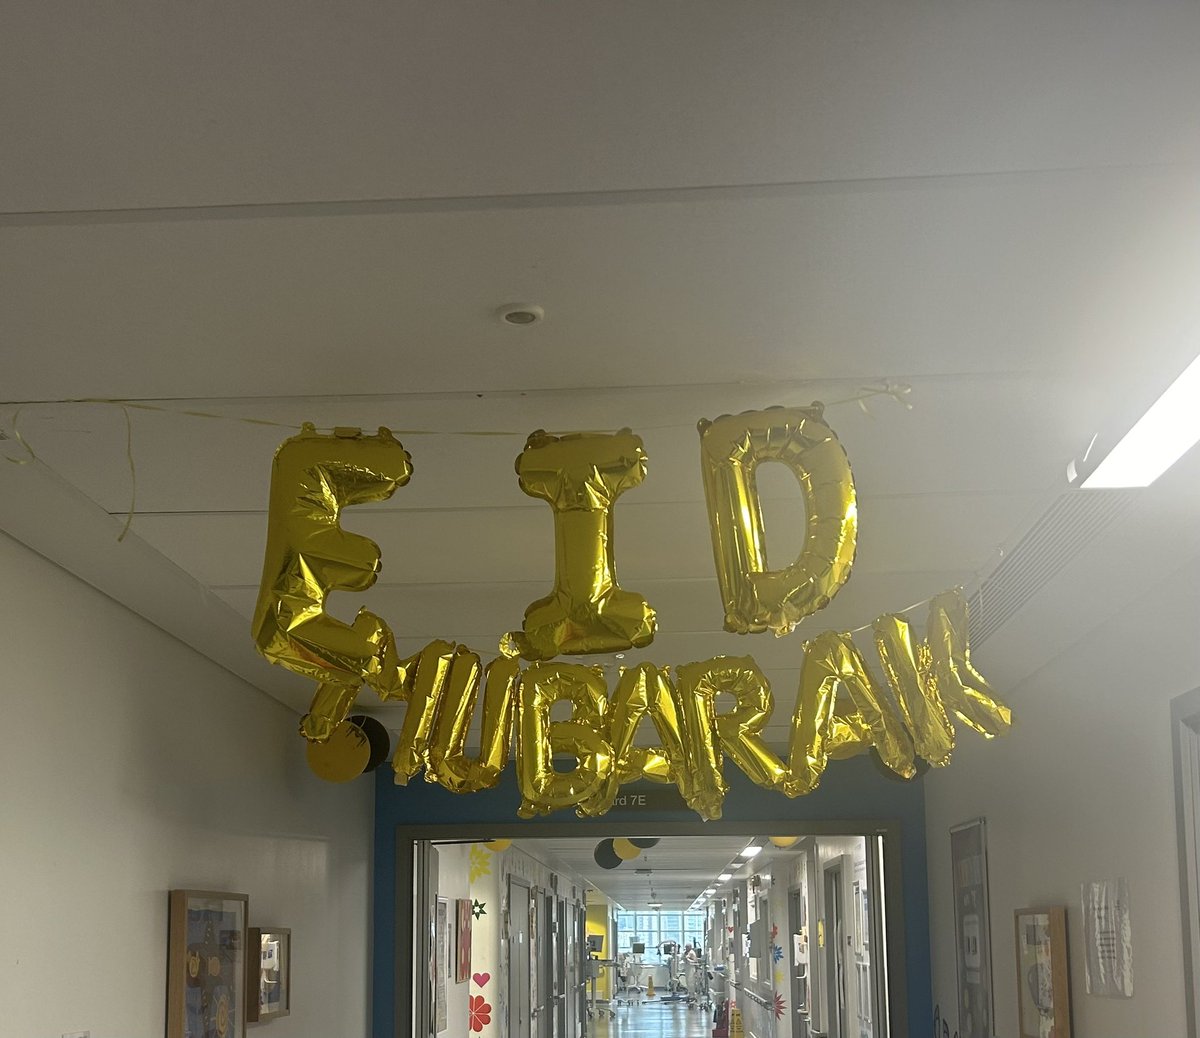 Wishing everyone a happy #eidmubarak today, we have lots of decorations and displays to help those who are in hospital or working celebrate ❤️